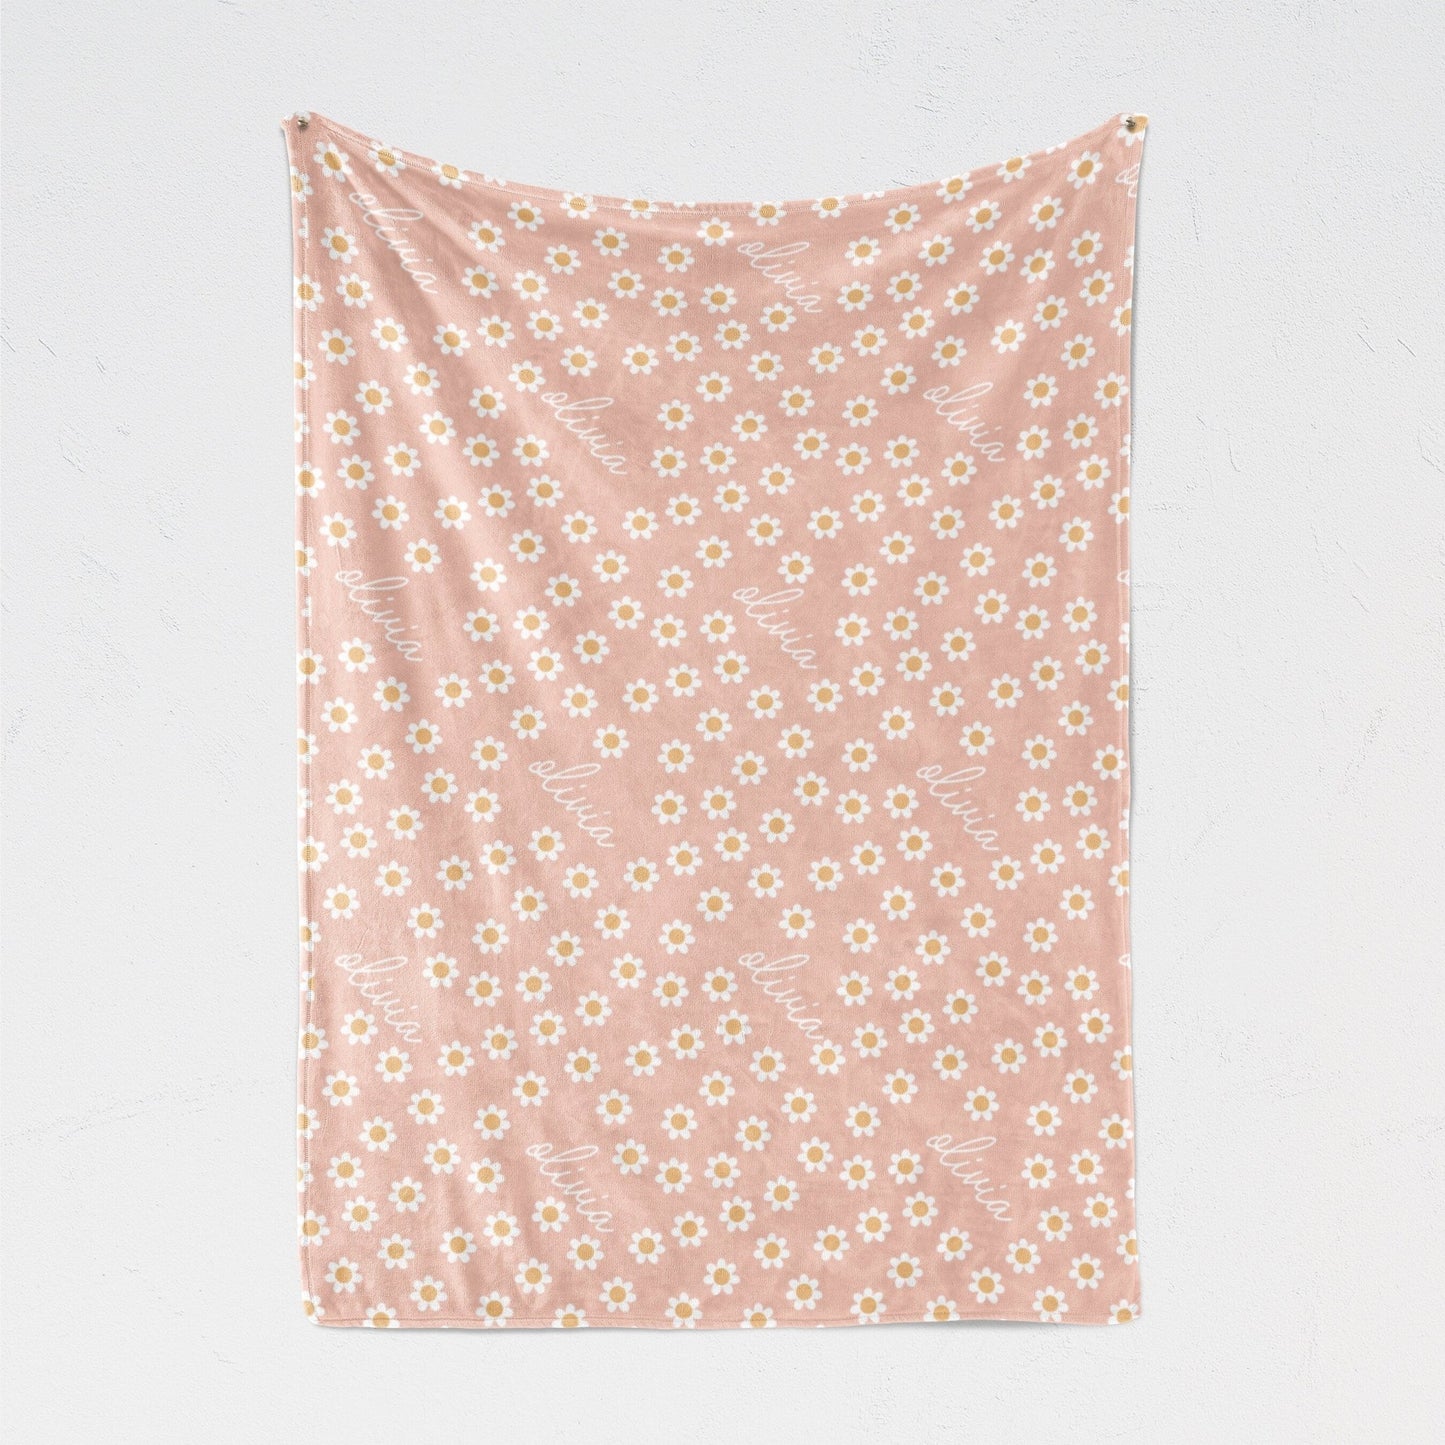 Baby Girl Pink Daisy Swaddle, Daisy Floral Personalized Swaddle Blanket, Baby Girl Boho Retro Pink Daisy - Squishy Cheeks